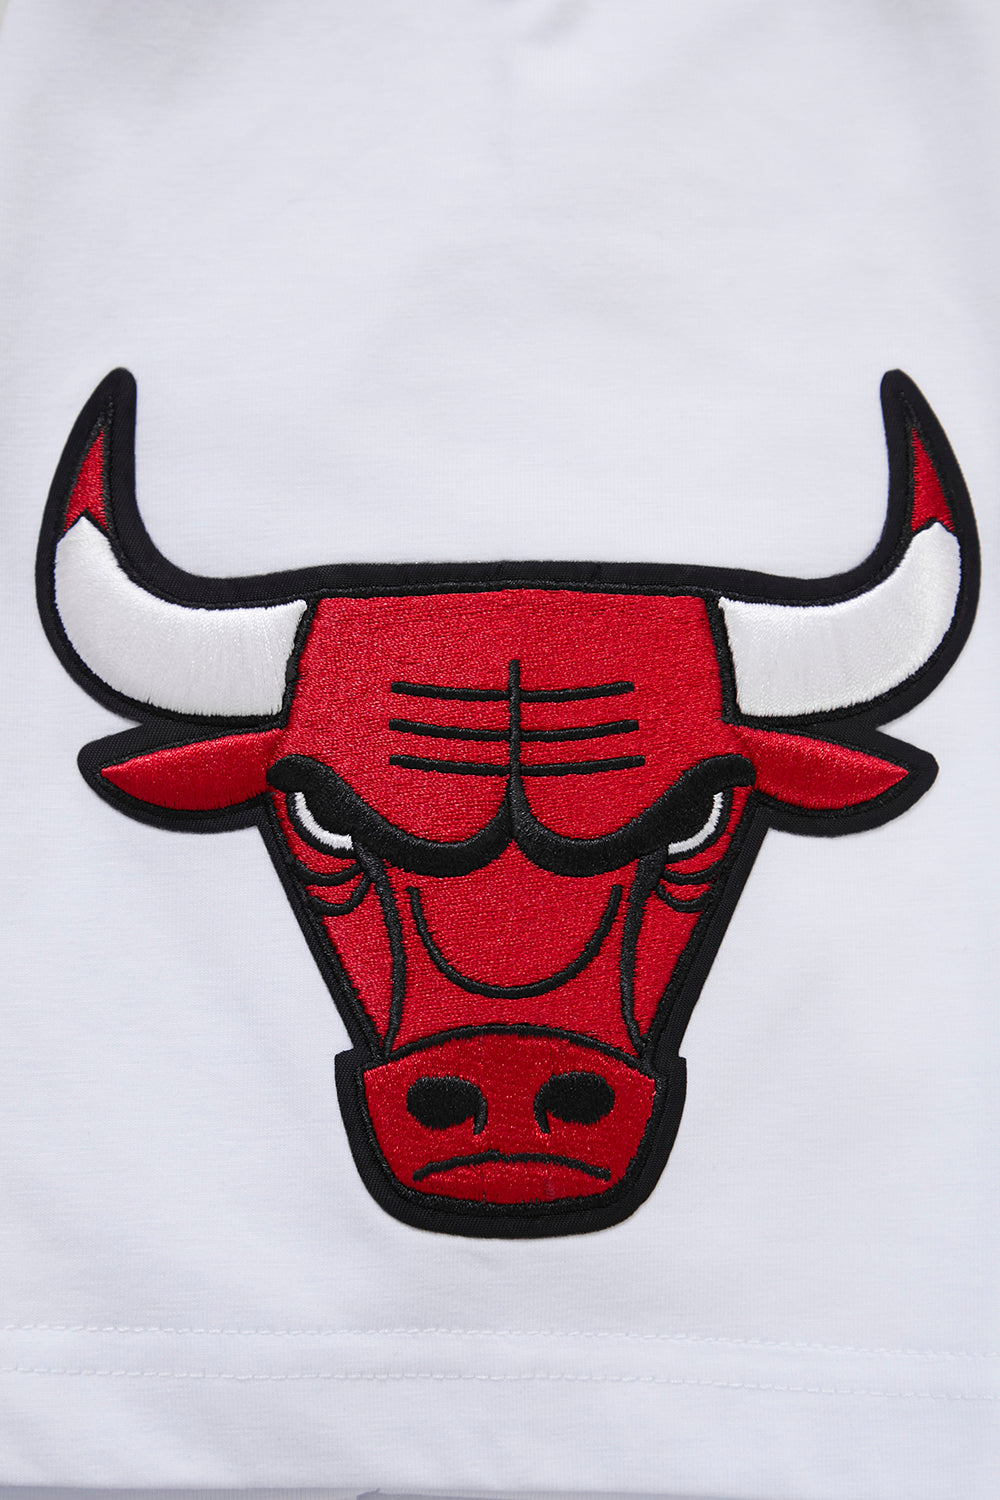 Oracle Red Bull Racing Shop: Replica T-Shirt | only here at redbullshop.com